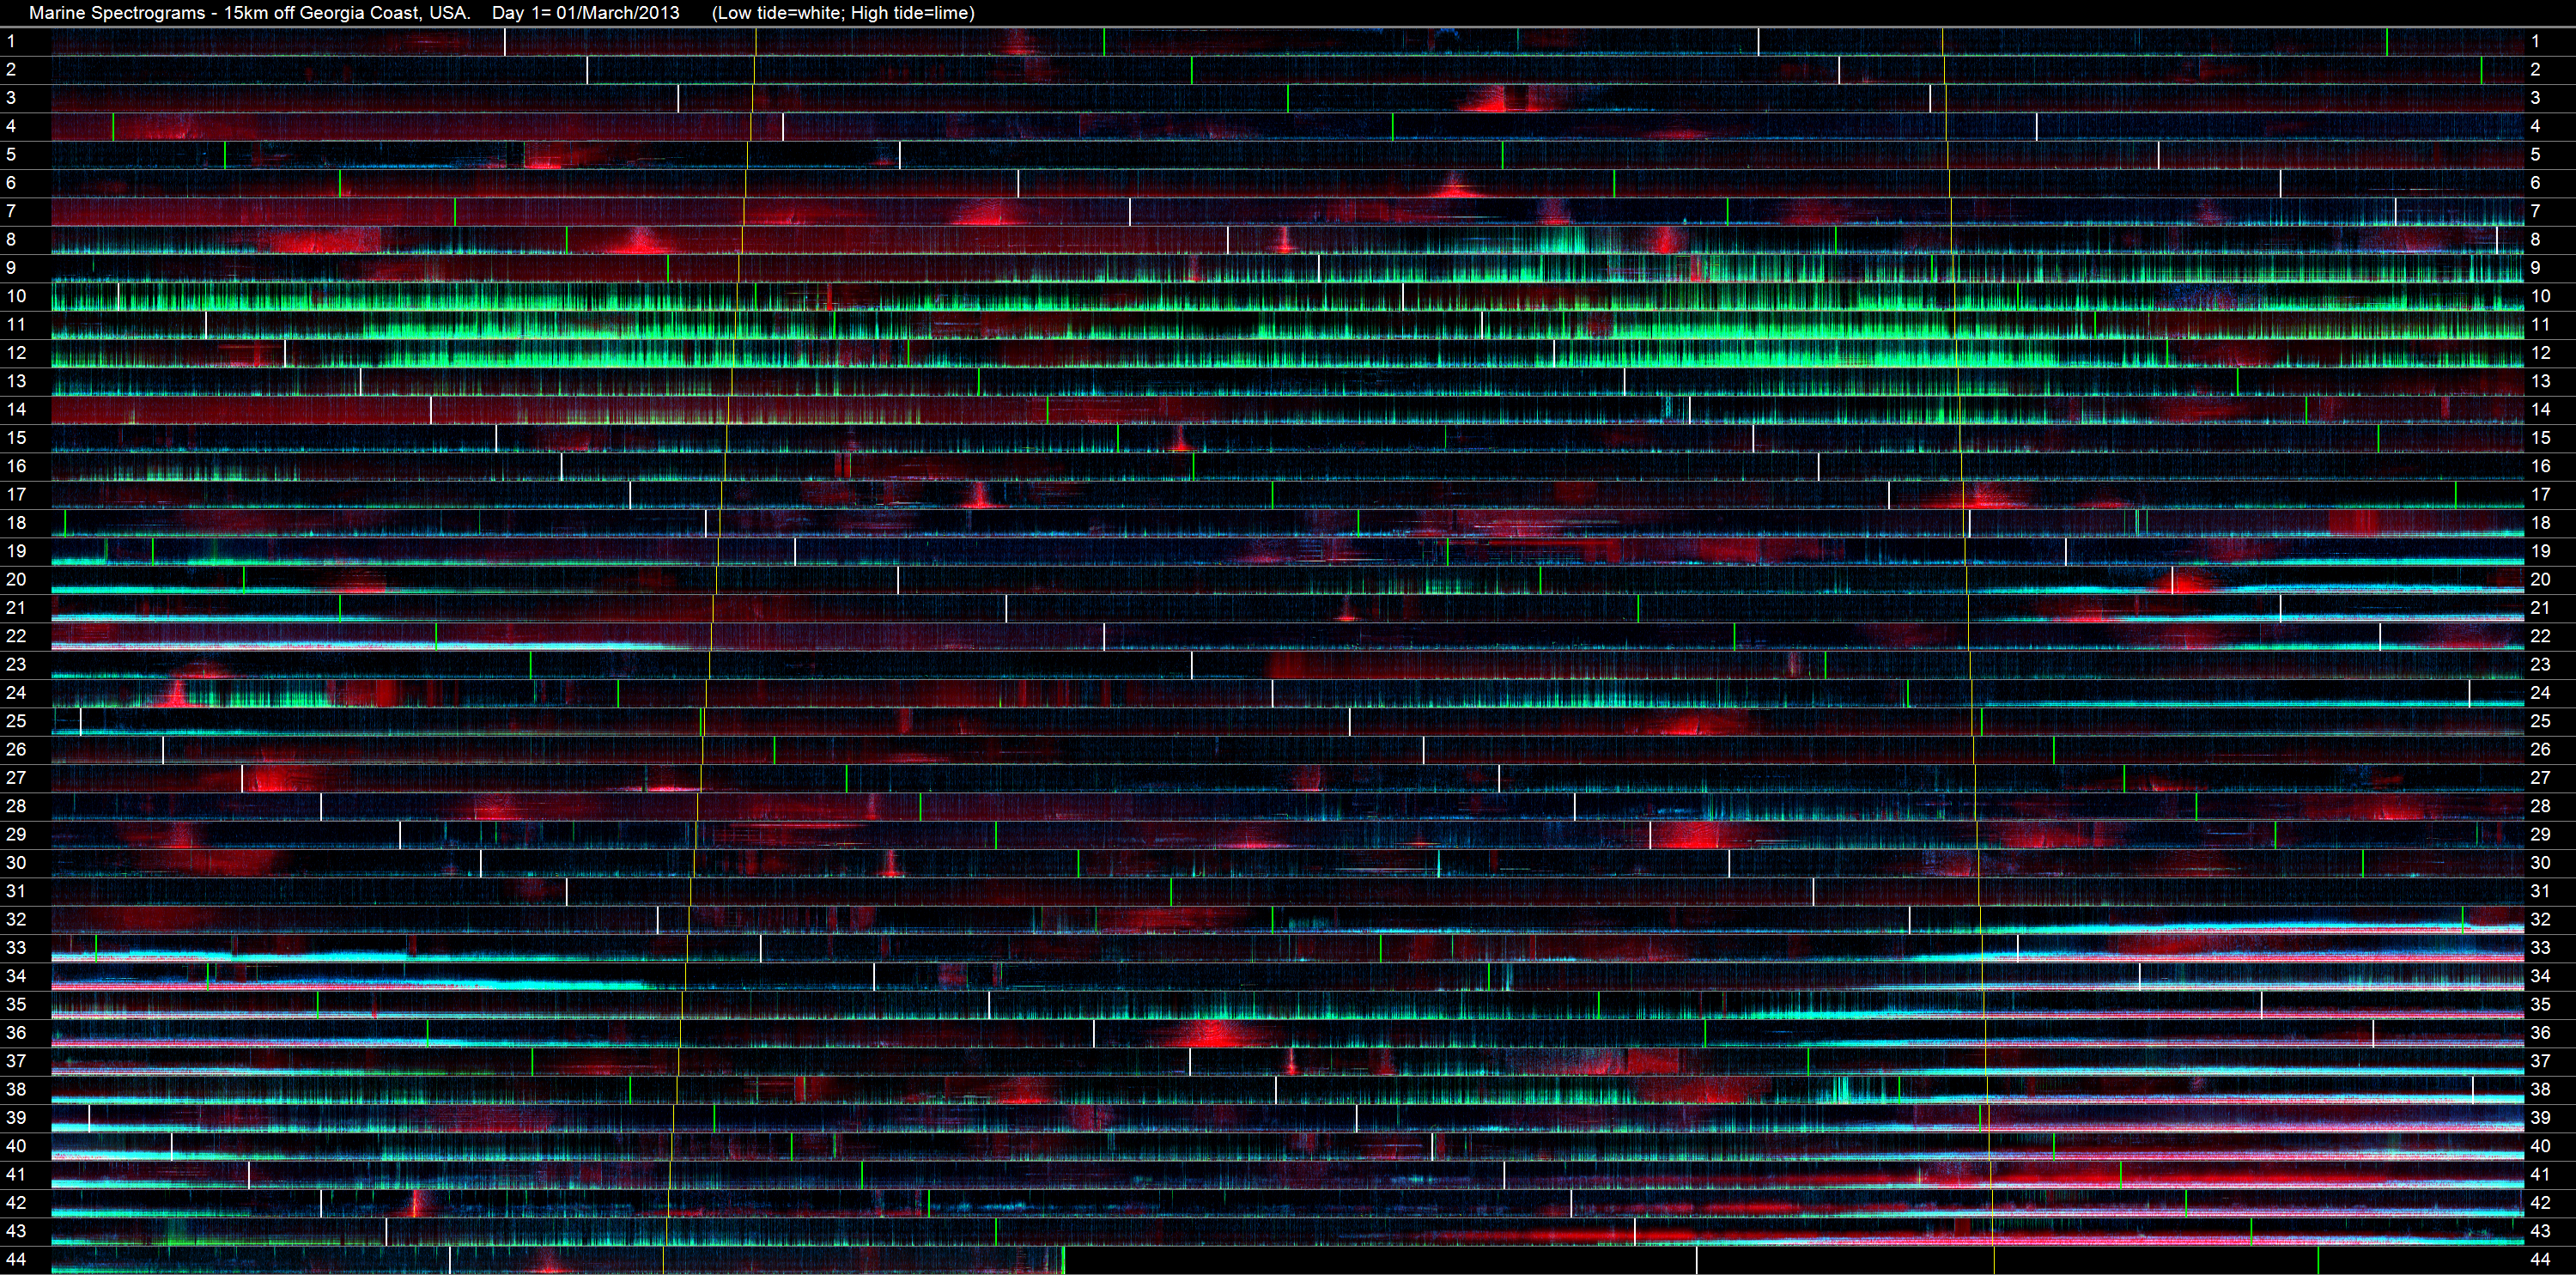 44 days of ocean recordings stacked as false color-spectrograms